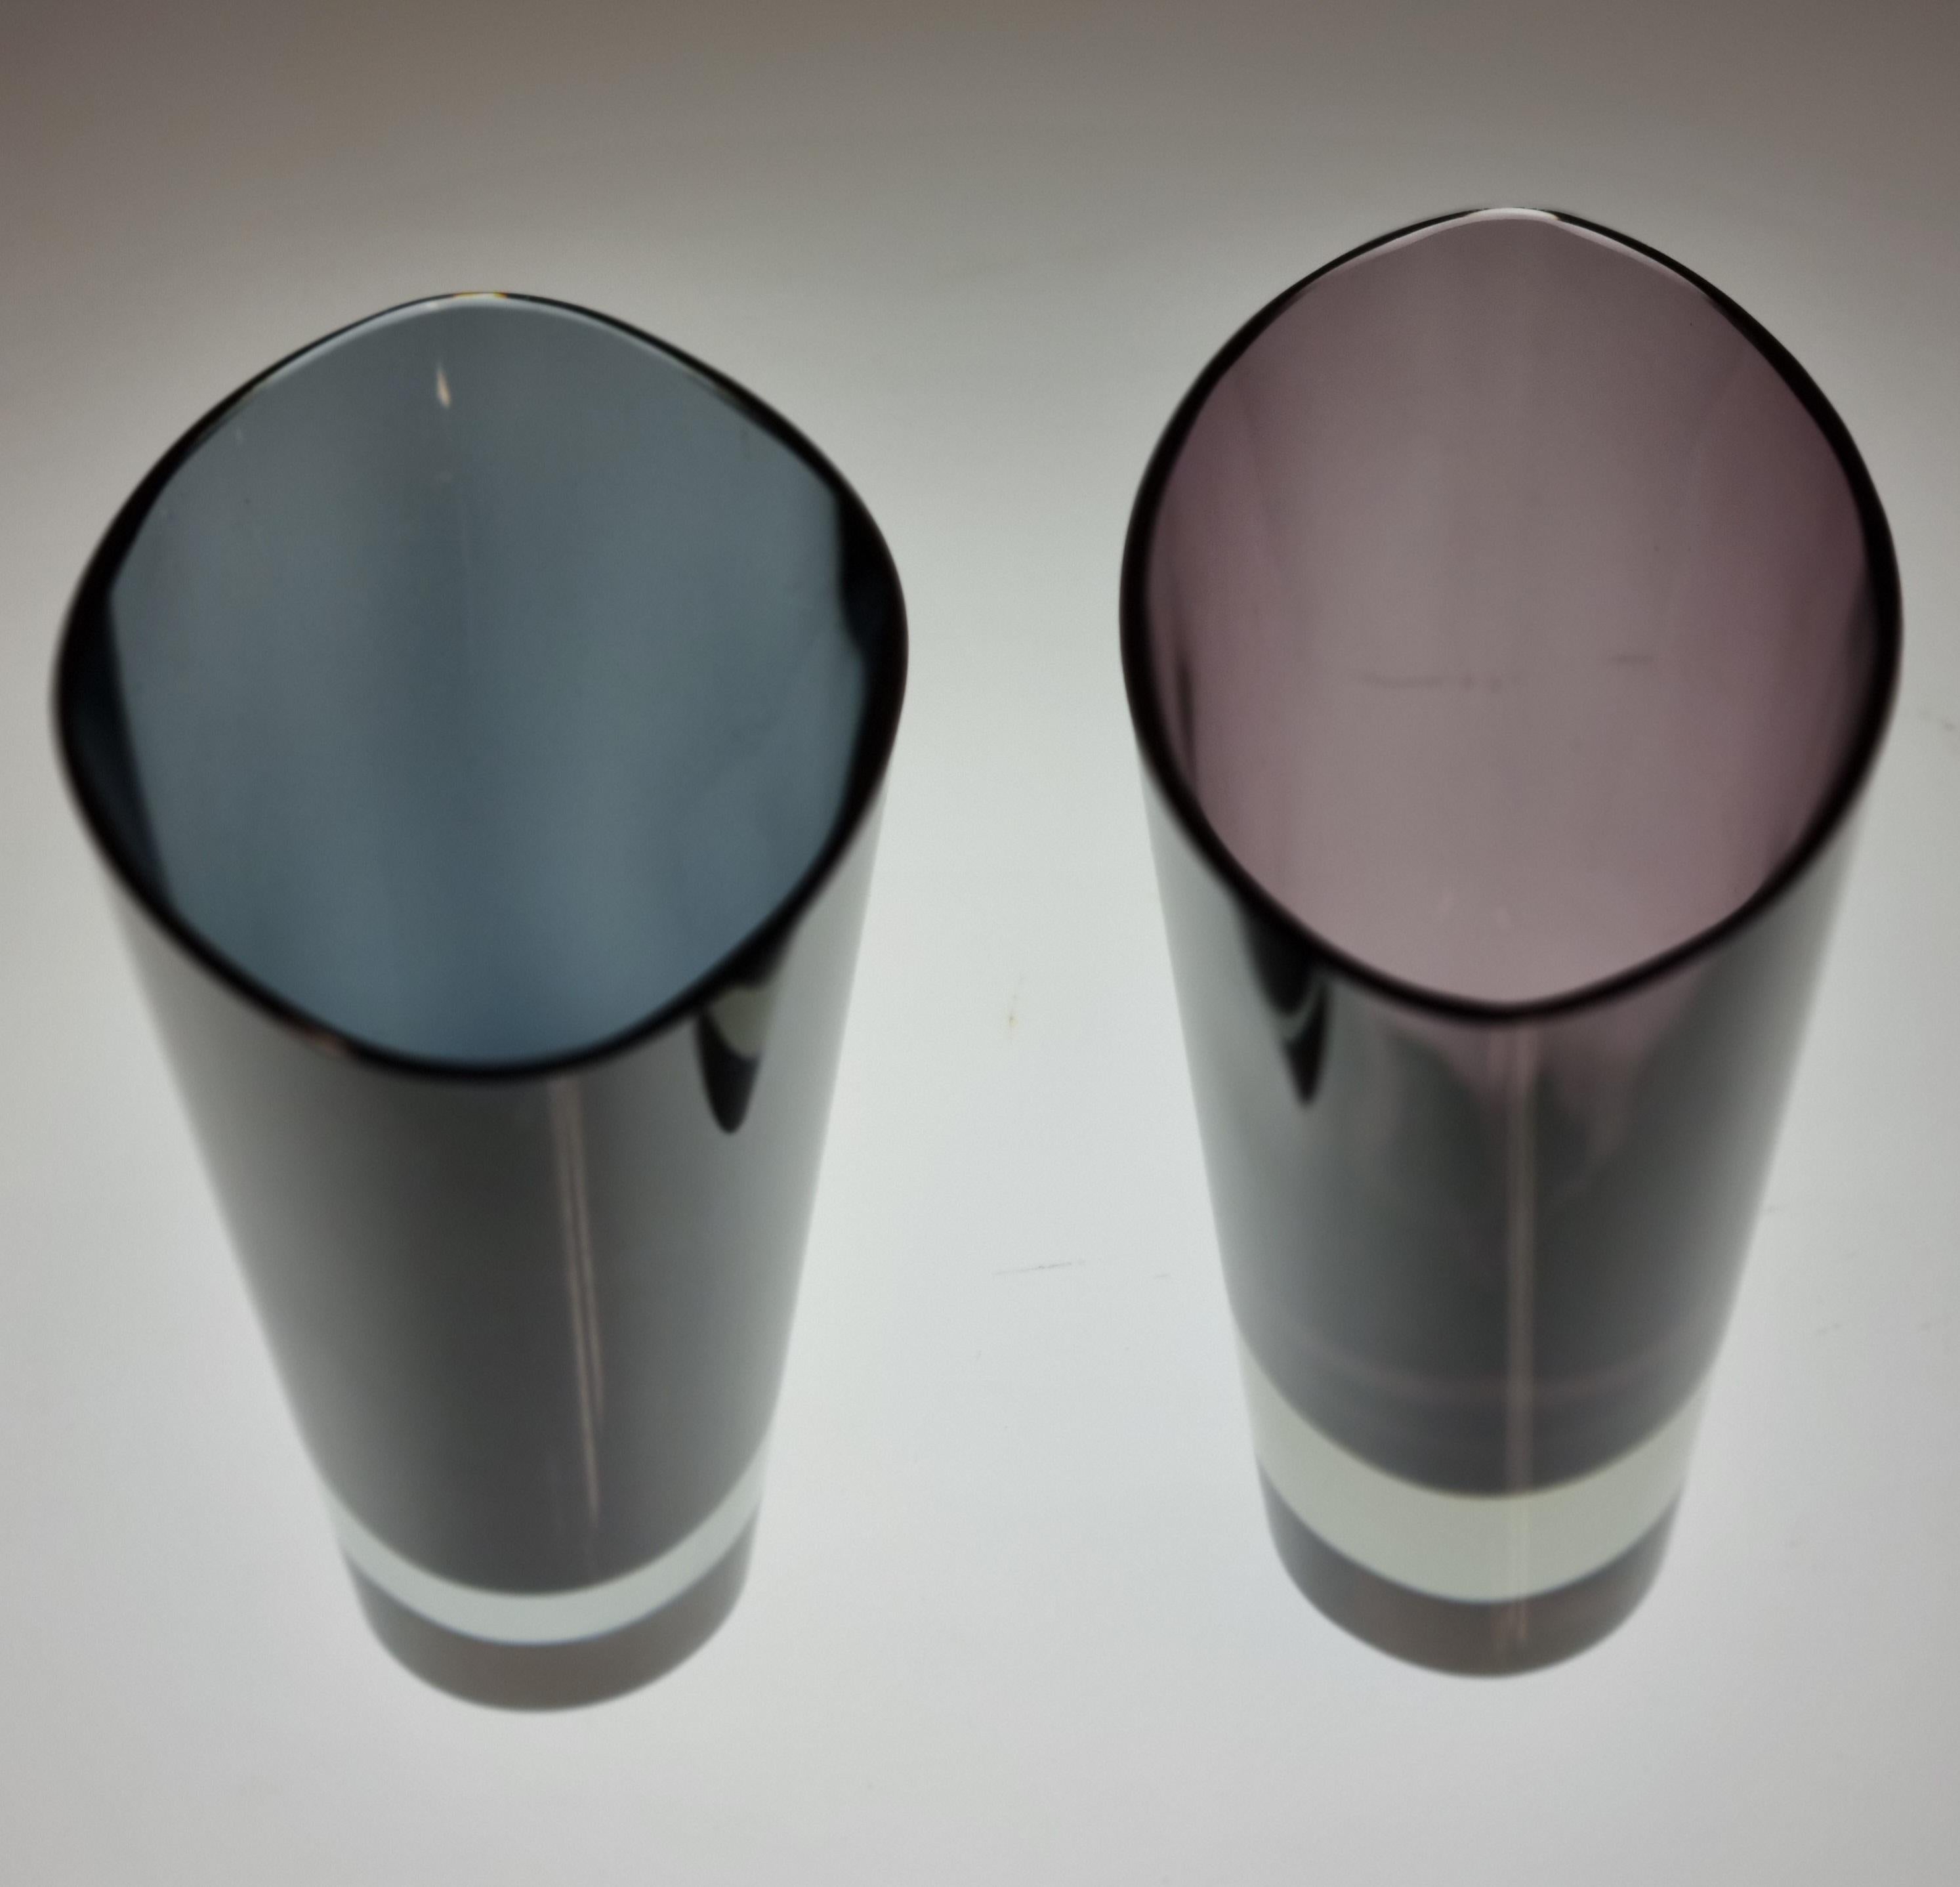 Kaj Frank (1911-1989), was a pioneer of sustainable development in the art glass area. He designed this tapered glass vase with oval rim and oval base model KF 234 and it was in producion during 1955-1964. The colors of these two vases are clear